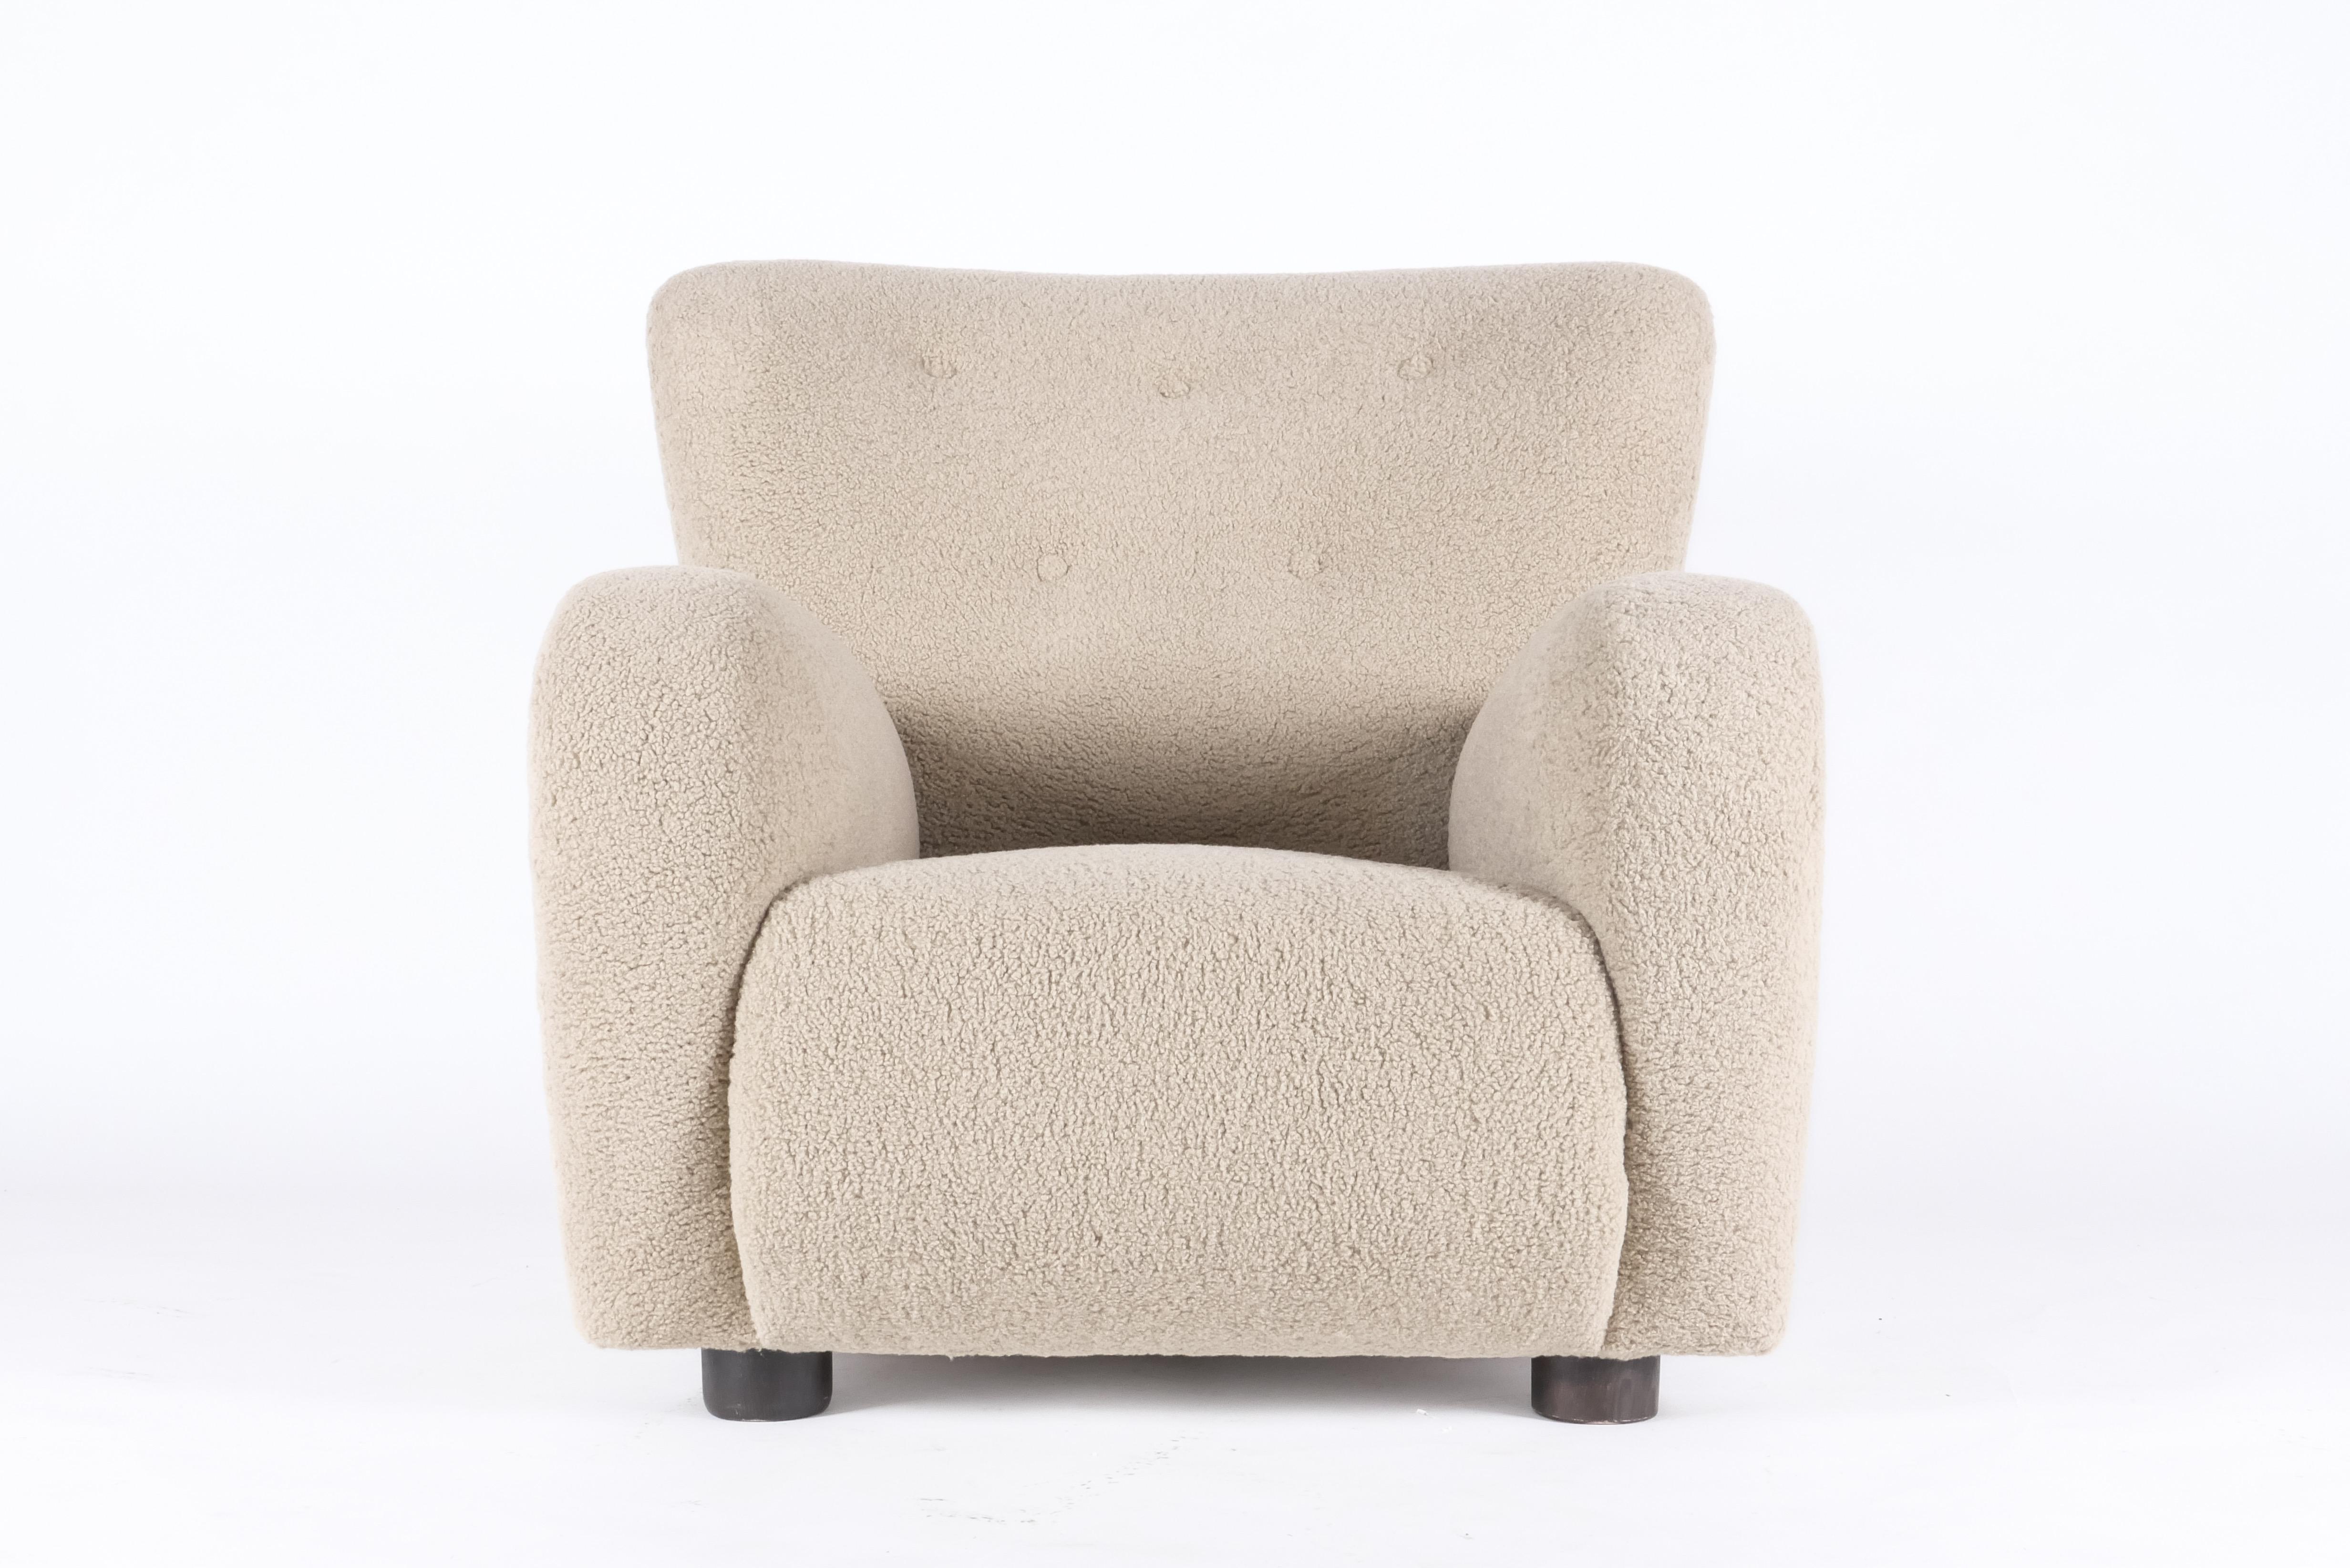 Large cozy armchair in the style of Fleming Lassen. Great chair for a reading nook or anywhere comfort is essential. Grand scale, built by a skilled Danish cabinetmaker ensuring quality construction. Reupholstered in Italian alpaca bouclé. Beech